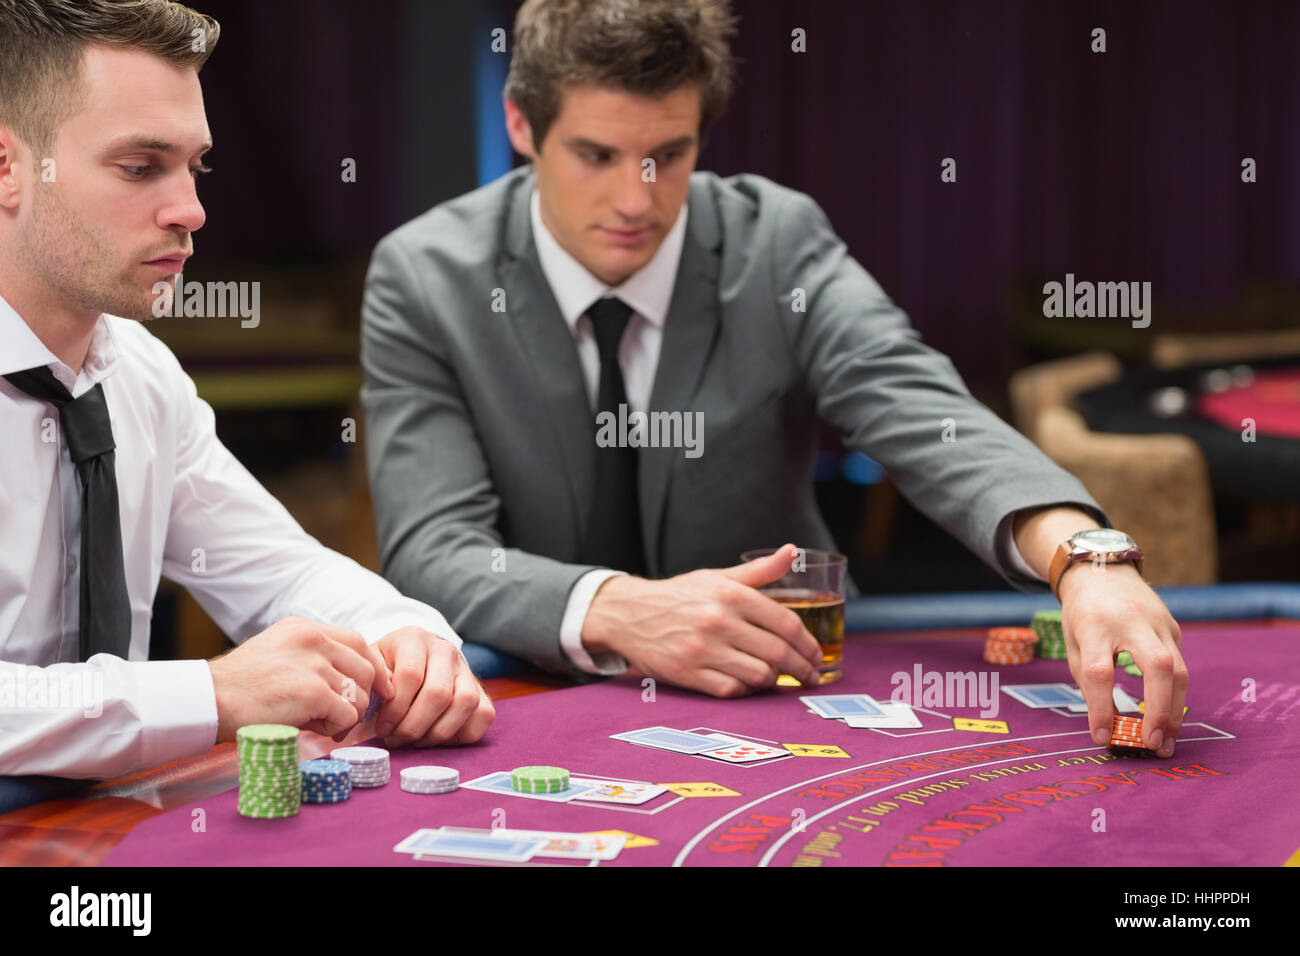 Men placing bets at poker game in casino Stock Photo